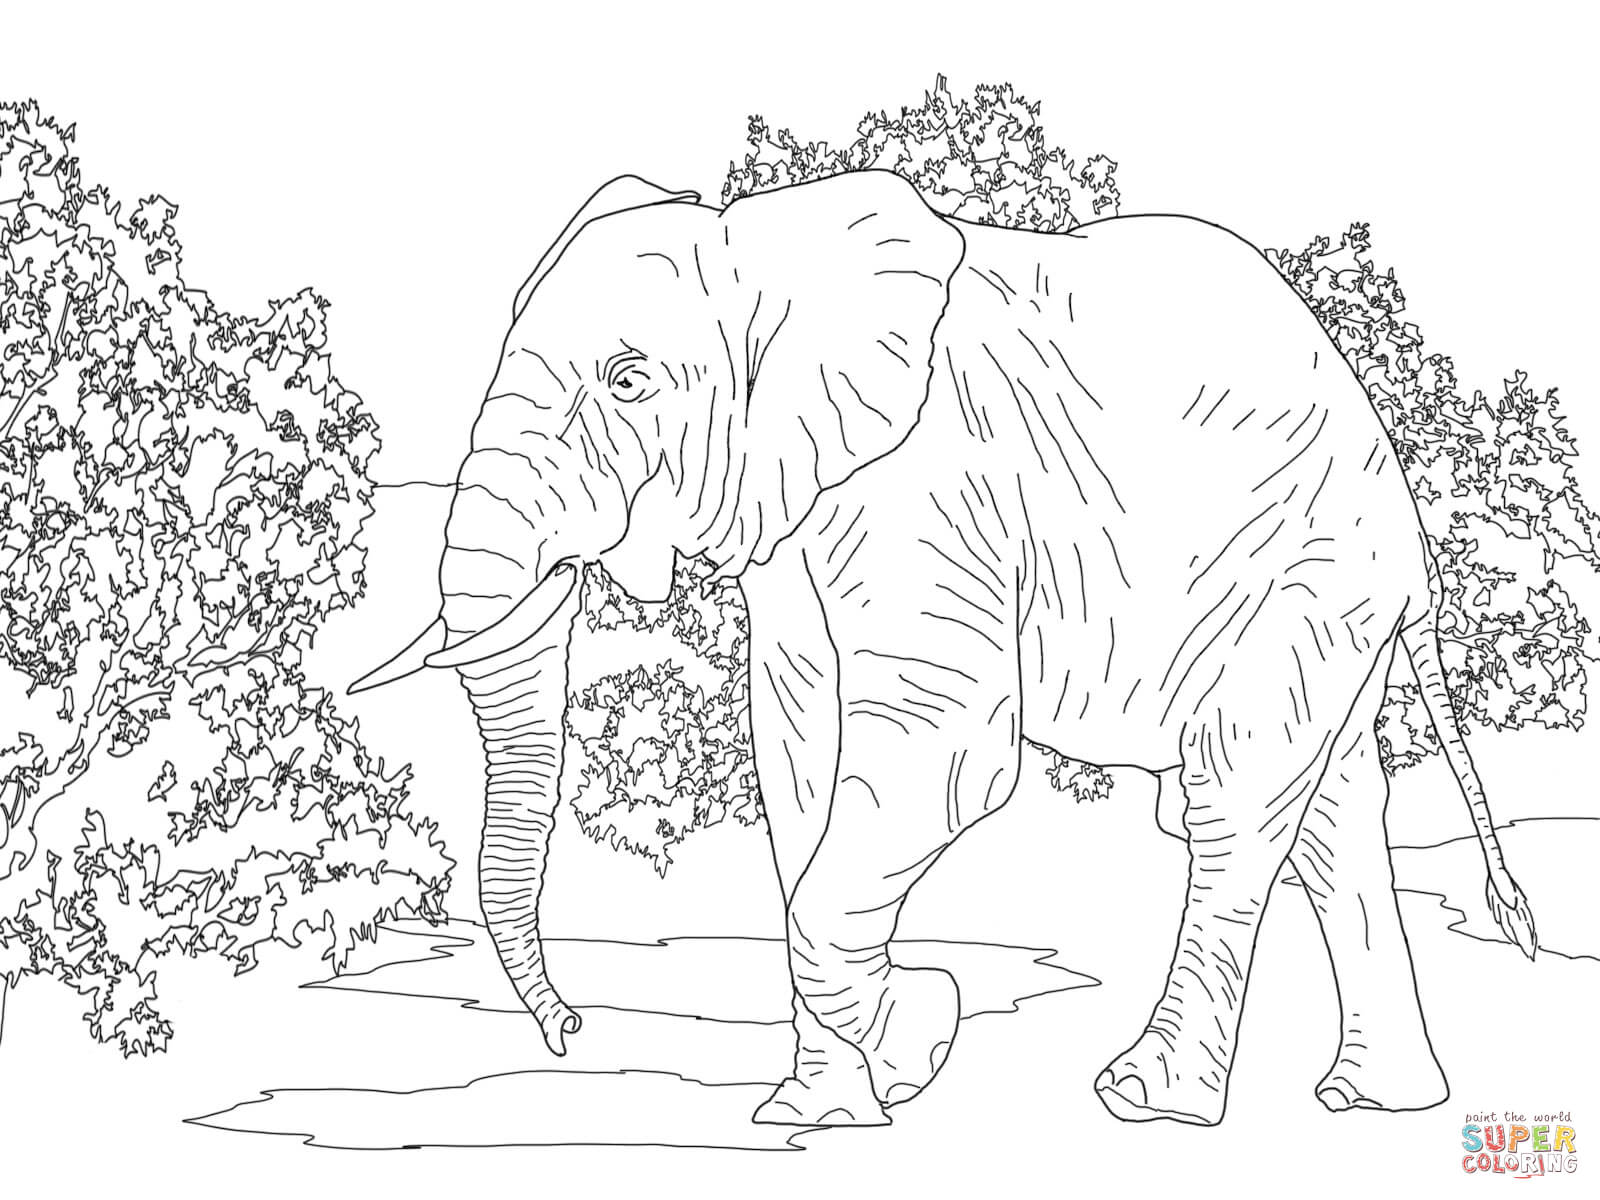 Elephants coloring pages | Free Coloring Pages